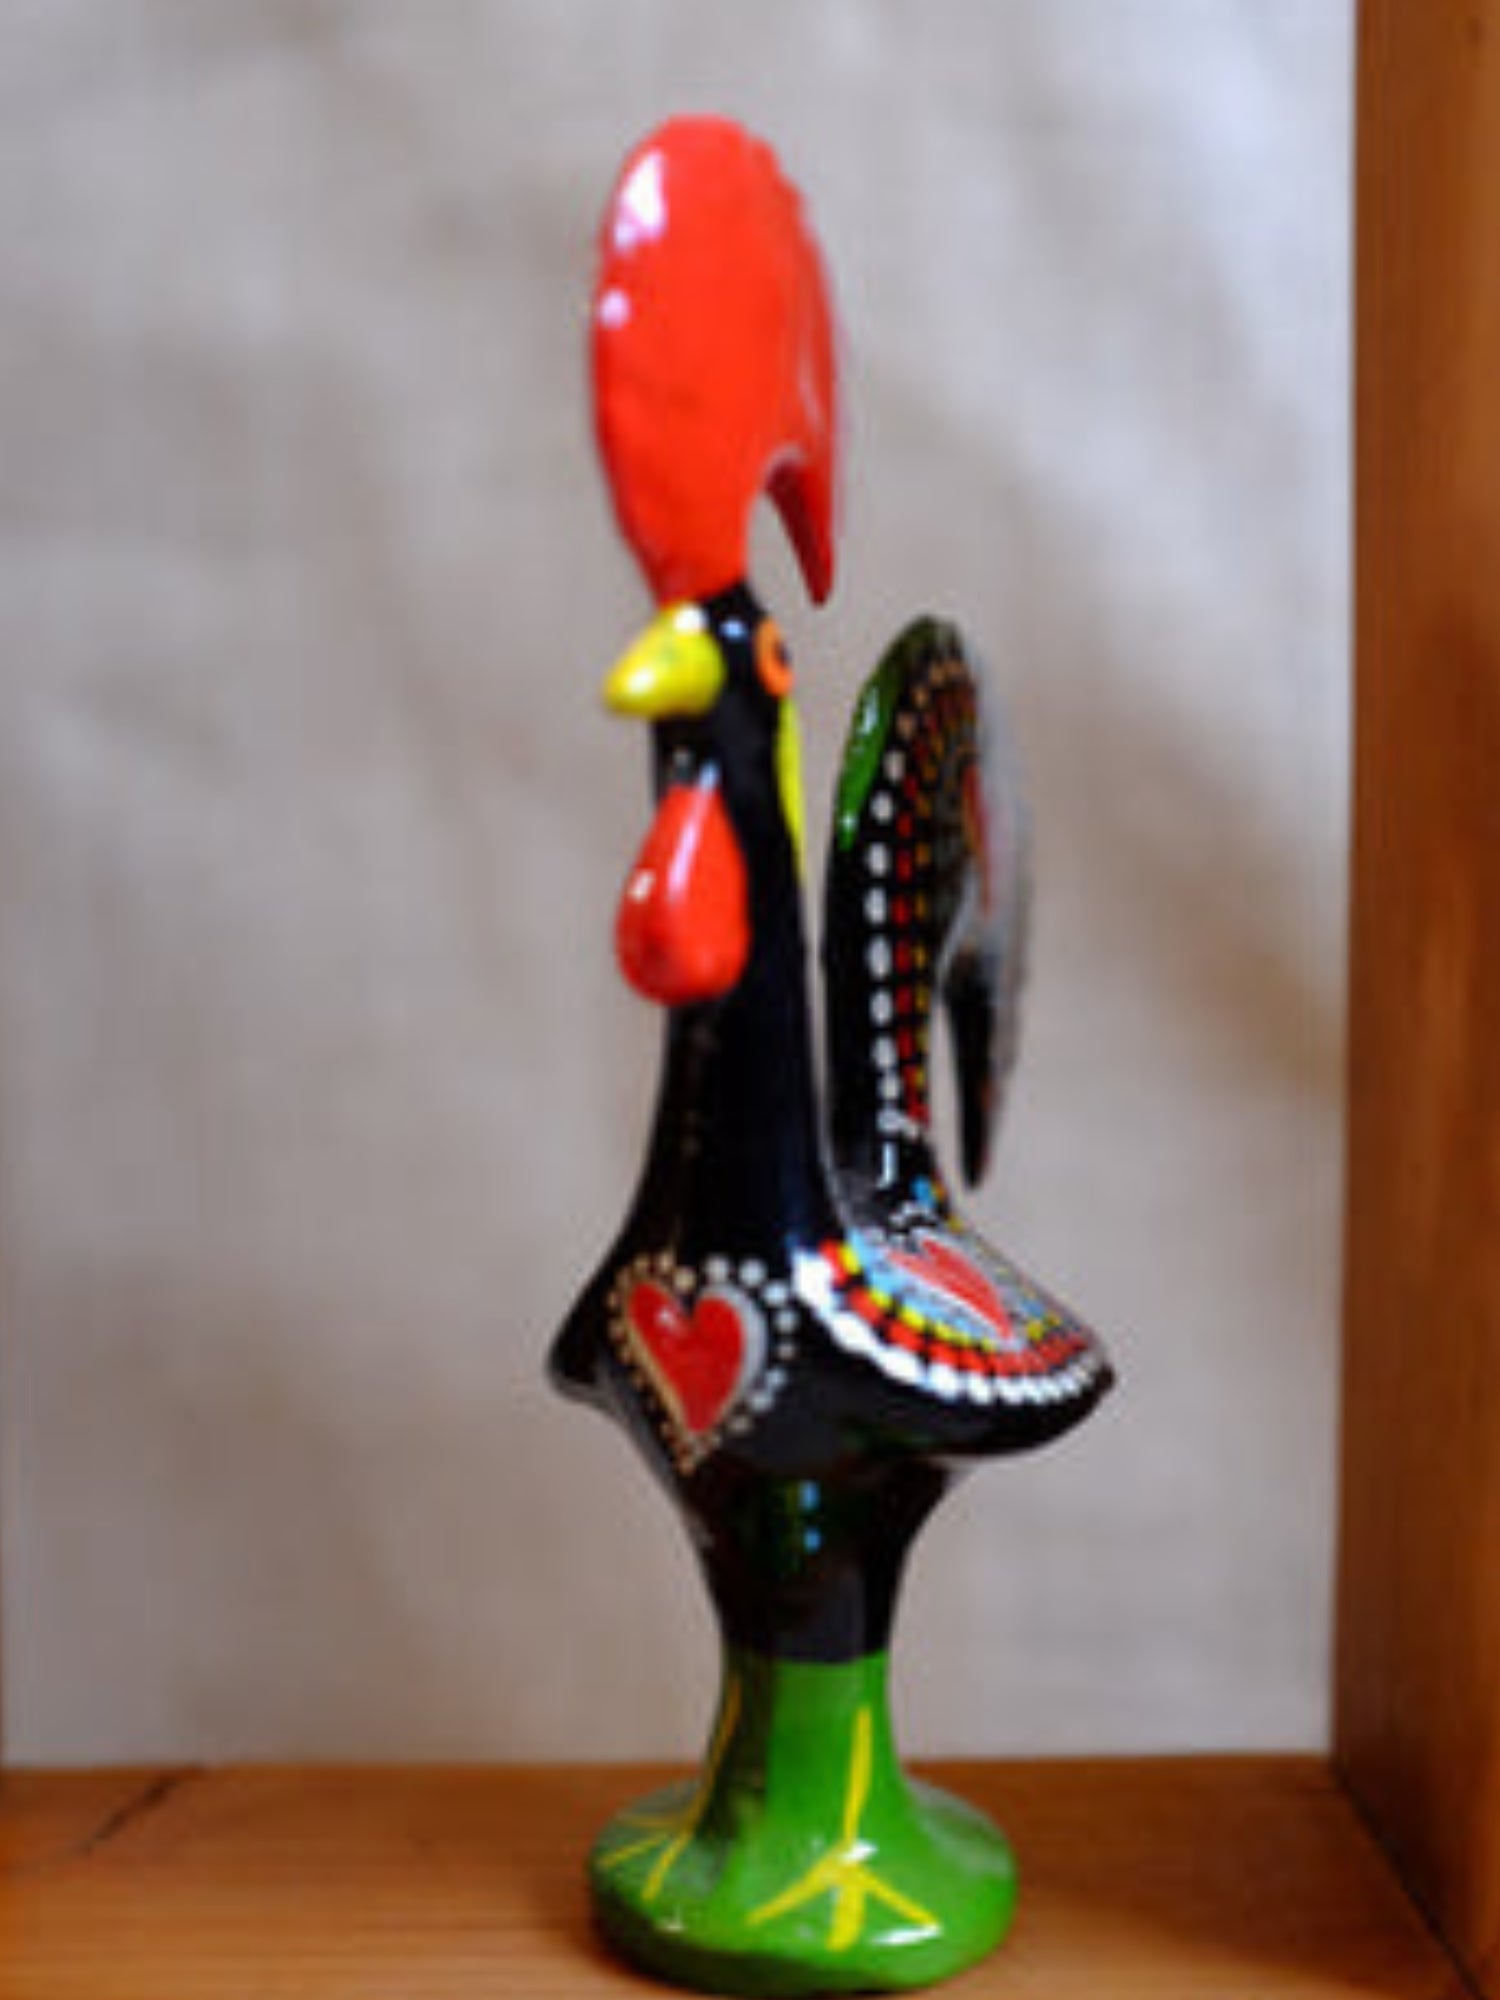 Tammy's rooster figurine